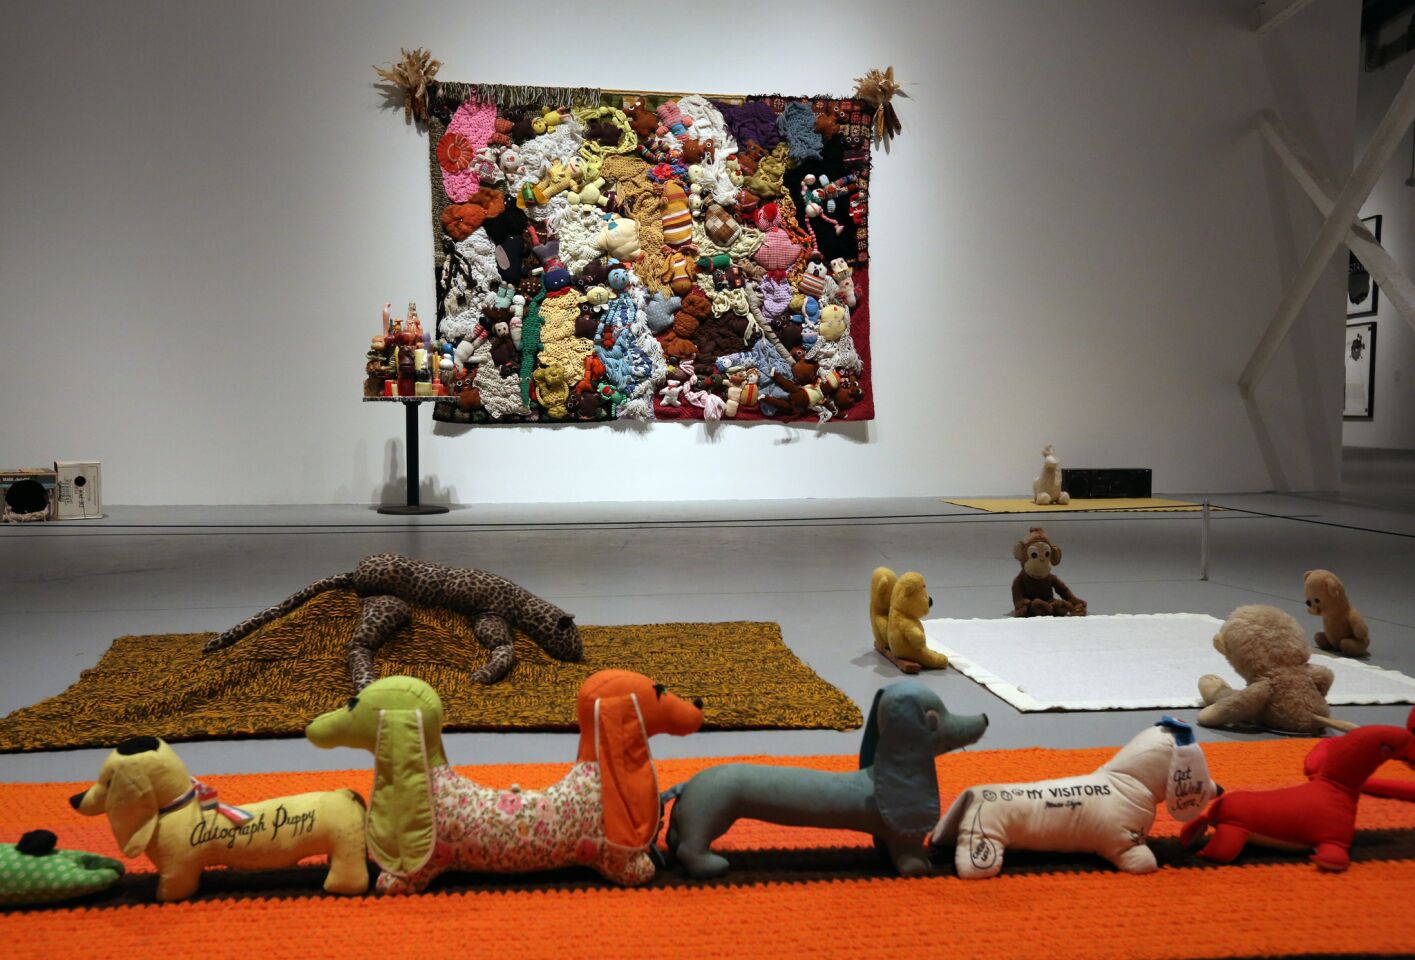 Stuffed animals from Mike Kelley's "Arena" series march along the floor of MOCA's Geffen Contemporary in the foreground. In the background is the late L.A. artist's "More Love Hours Than Can Ever Be Repaid," a large crocheted wall-hanging with stuffed animals. Both are part of a Kelley retrospective at the Geffen.